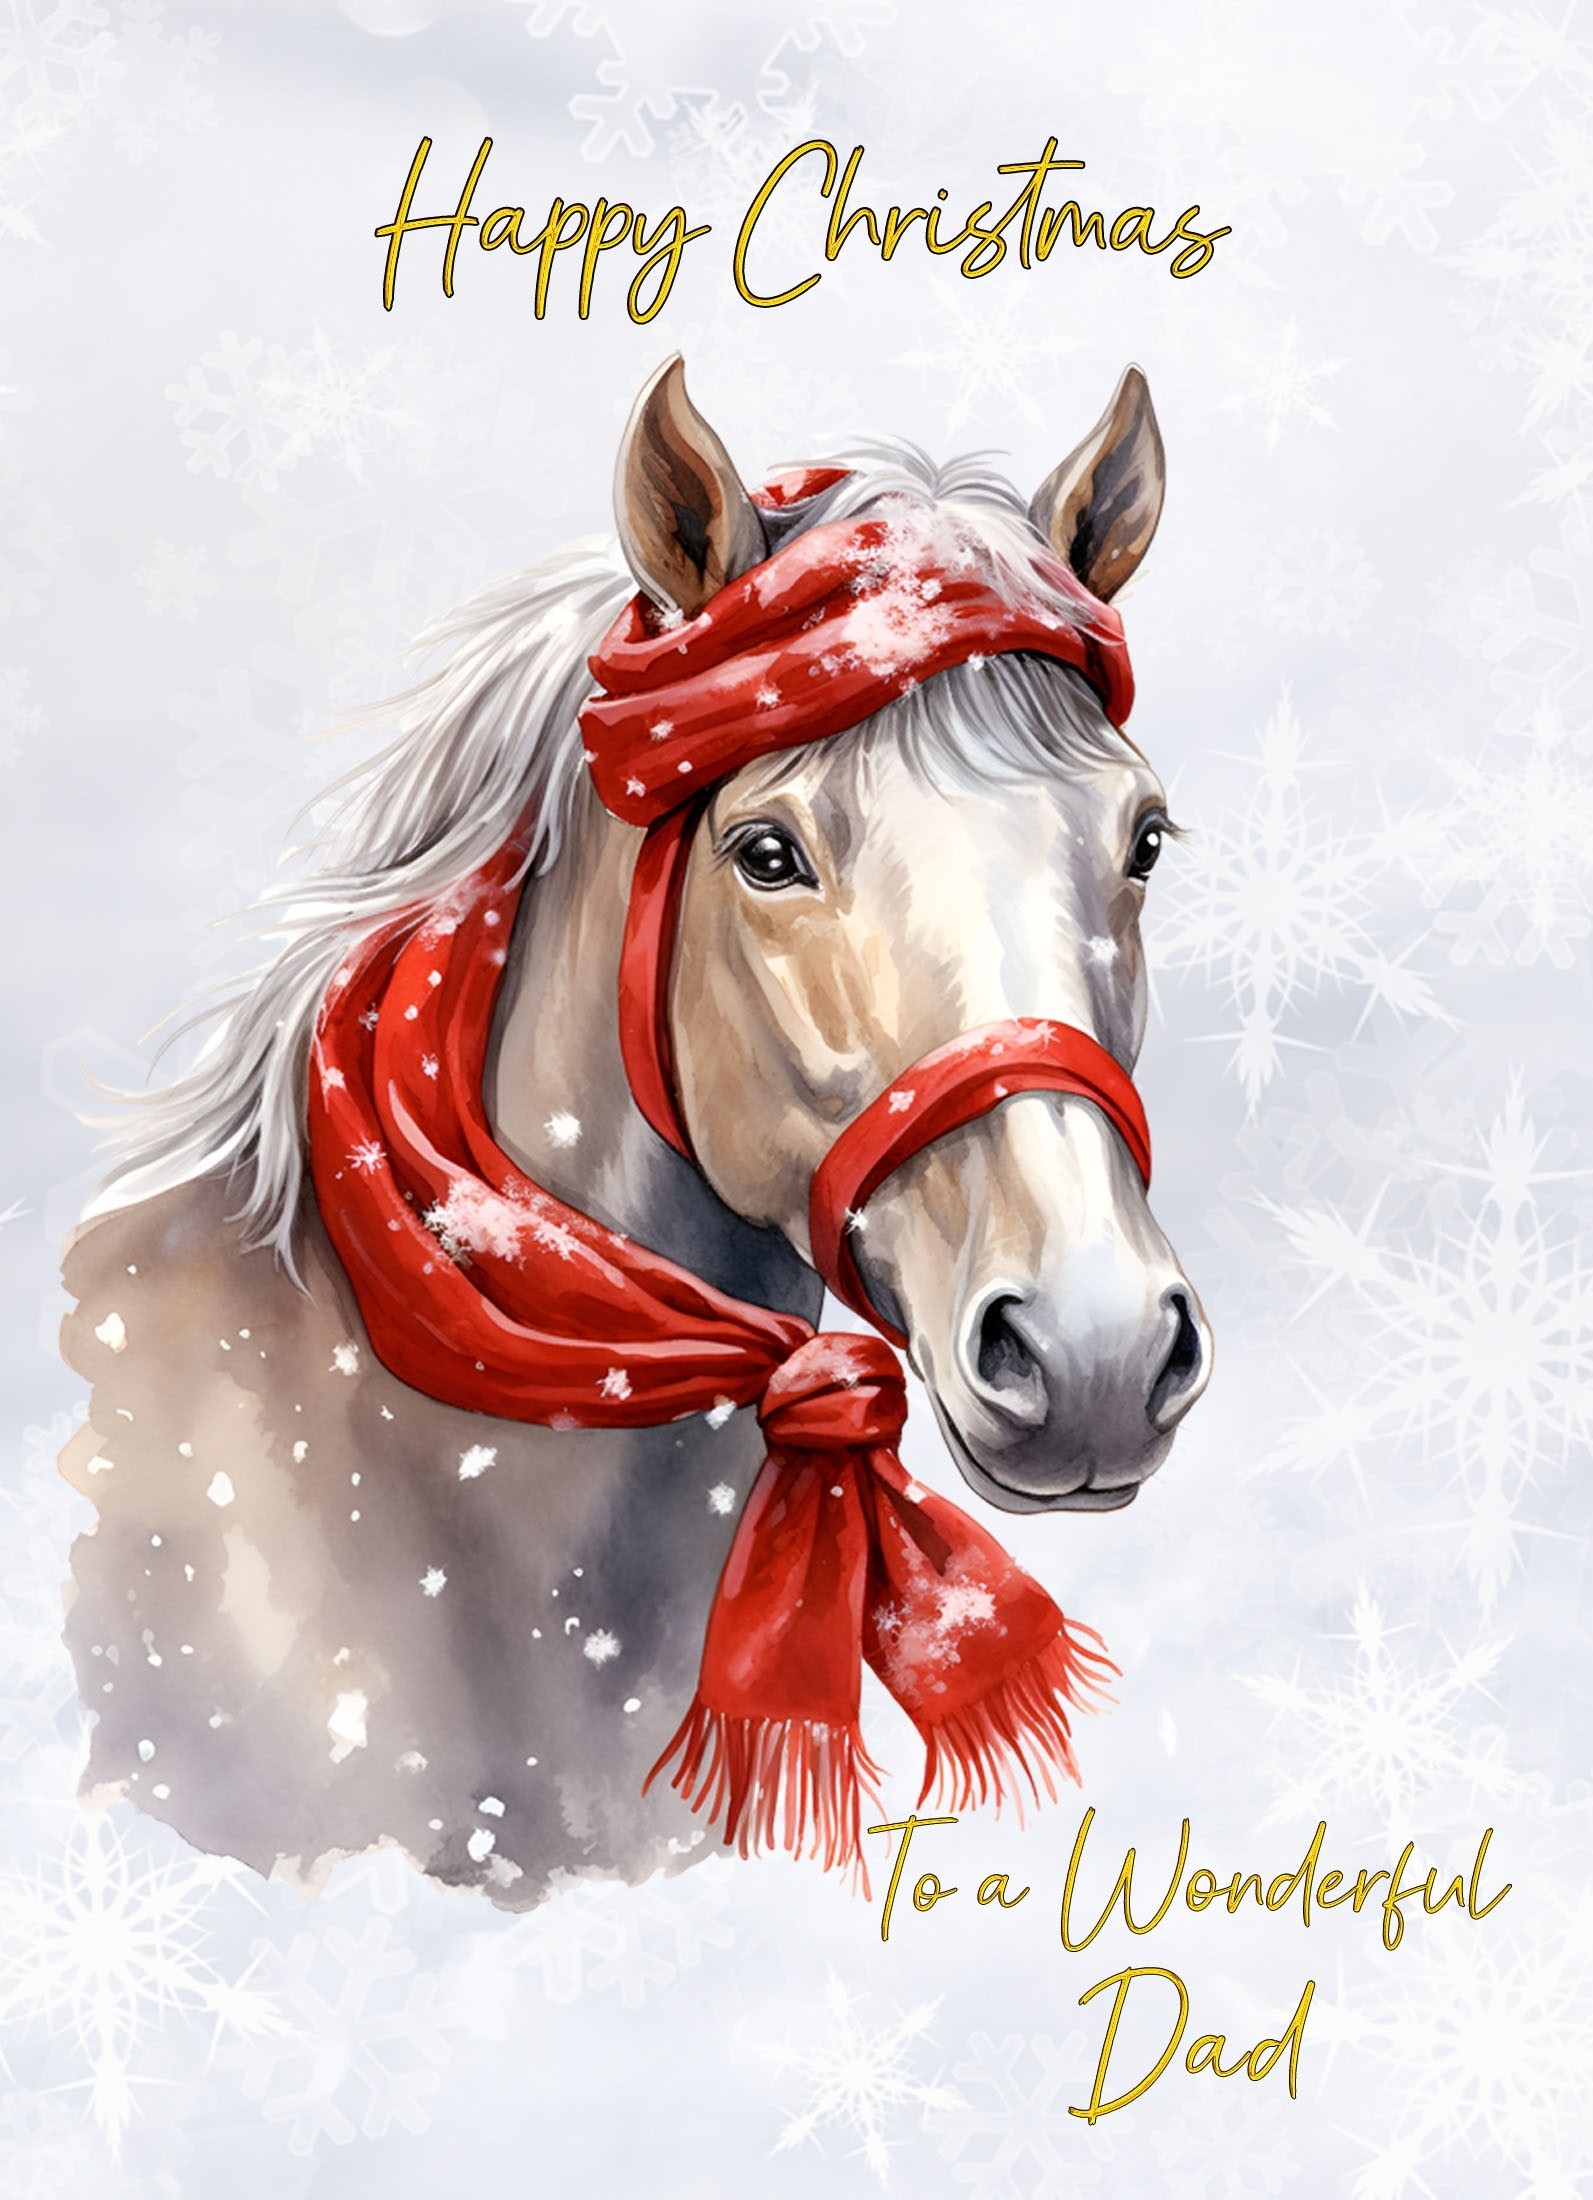 Christmas Card For Dad (Horse Art Red)